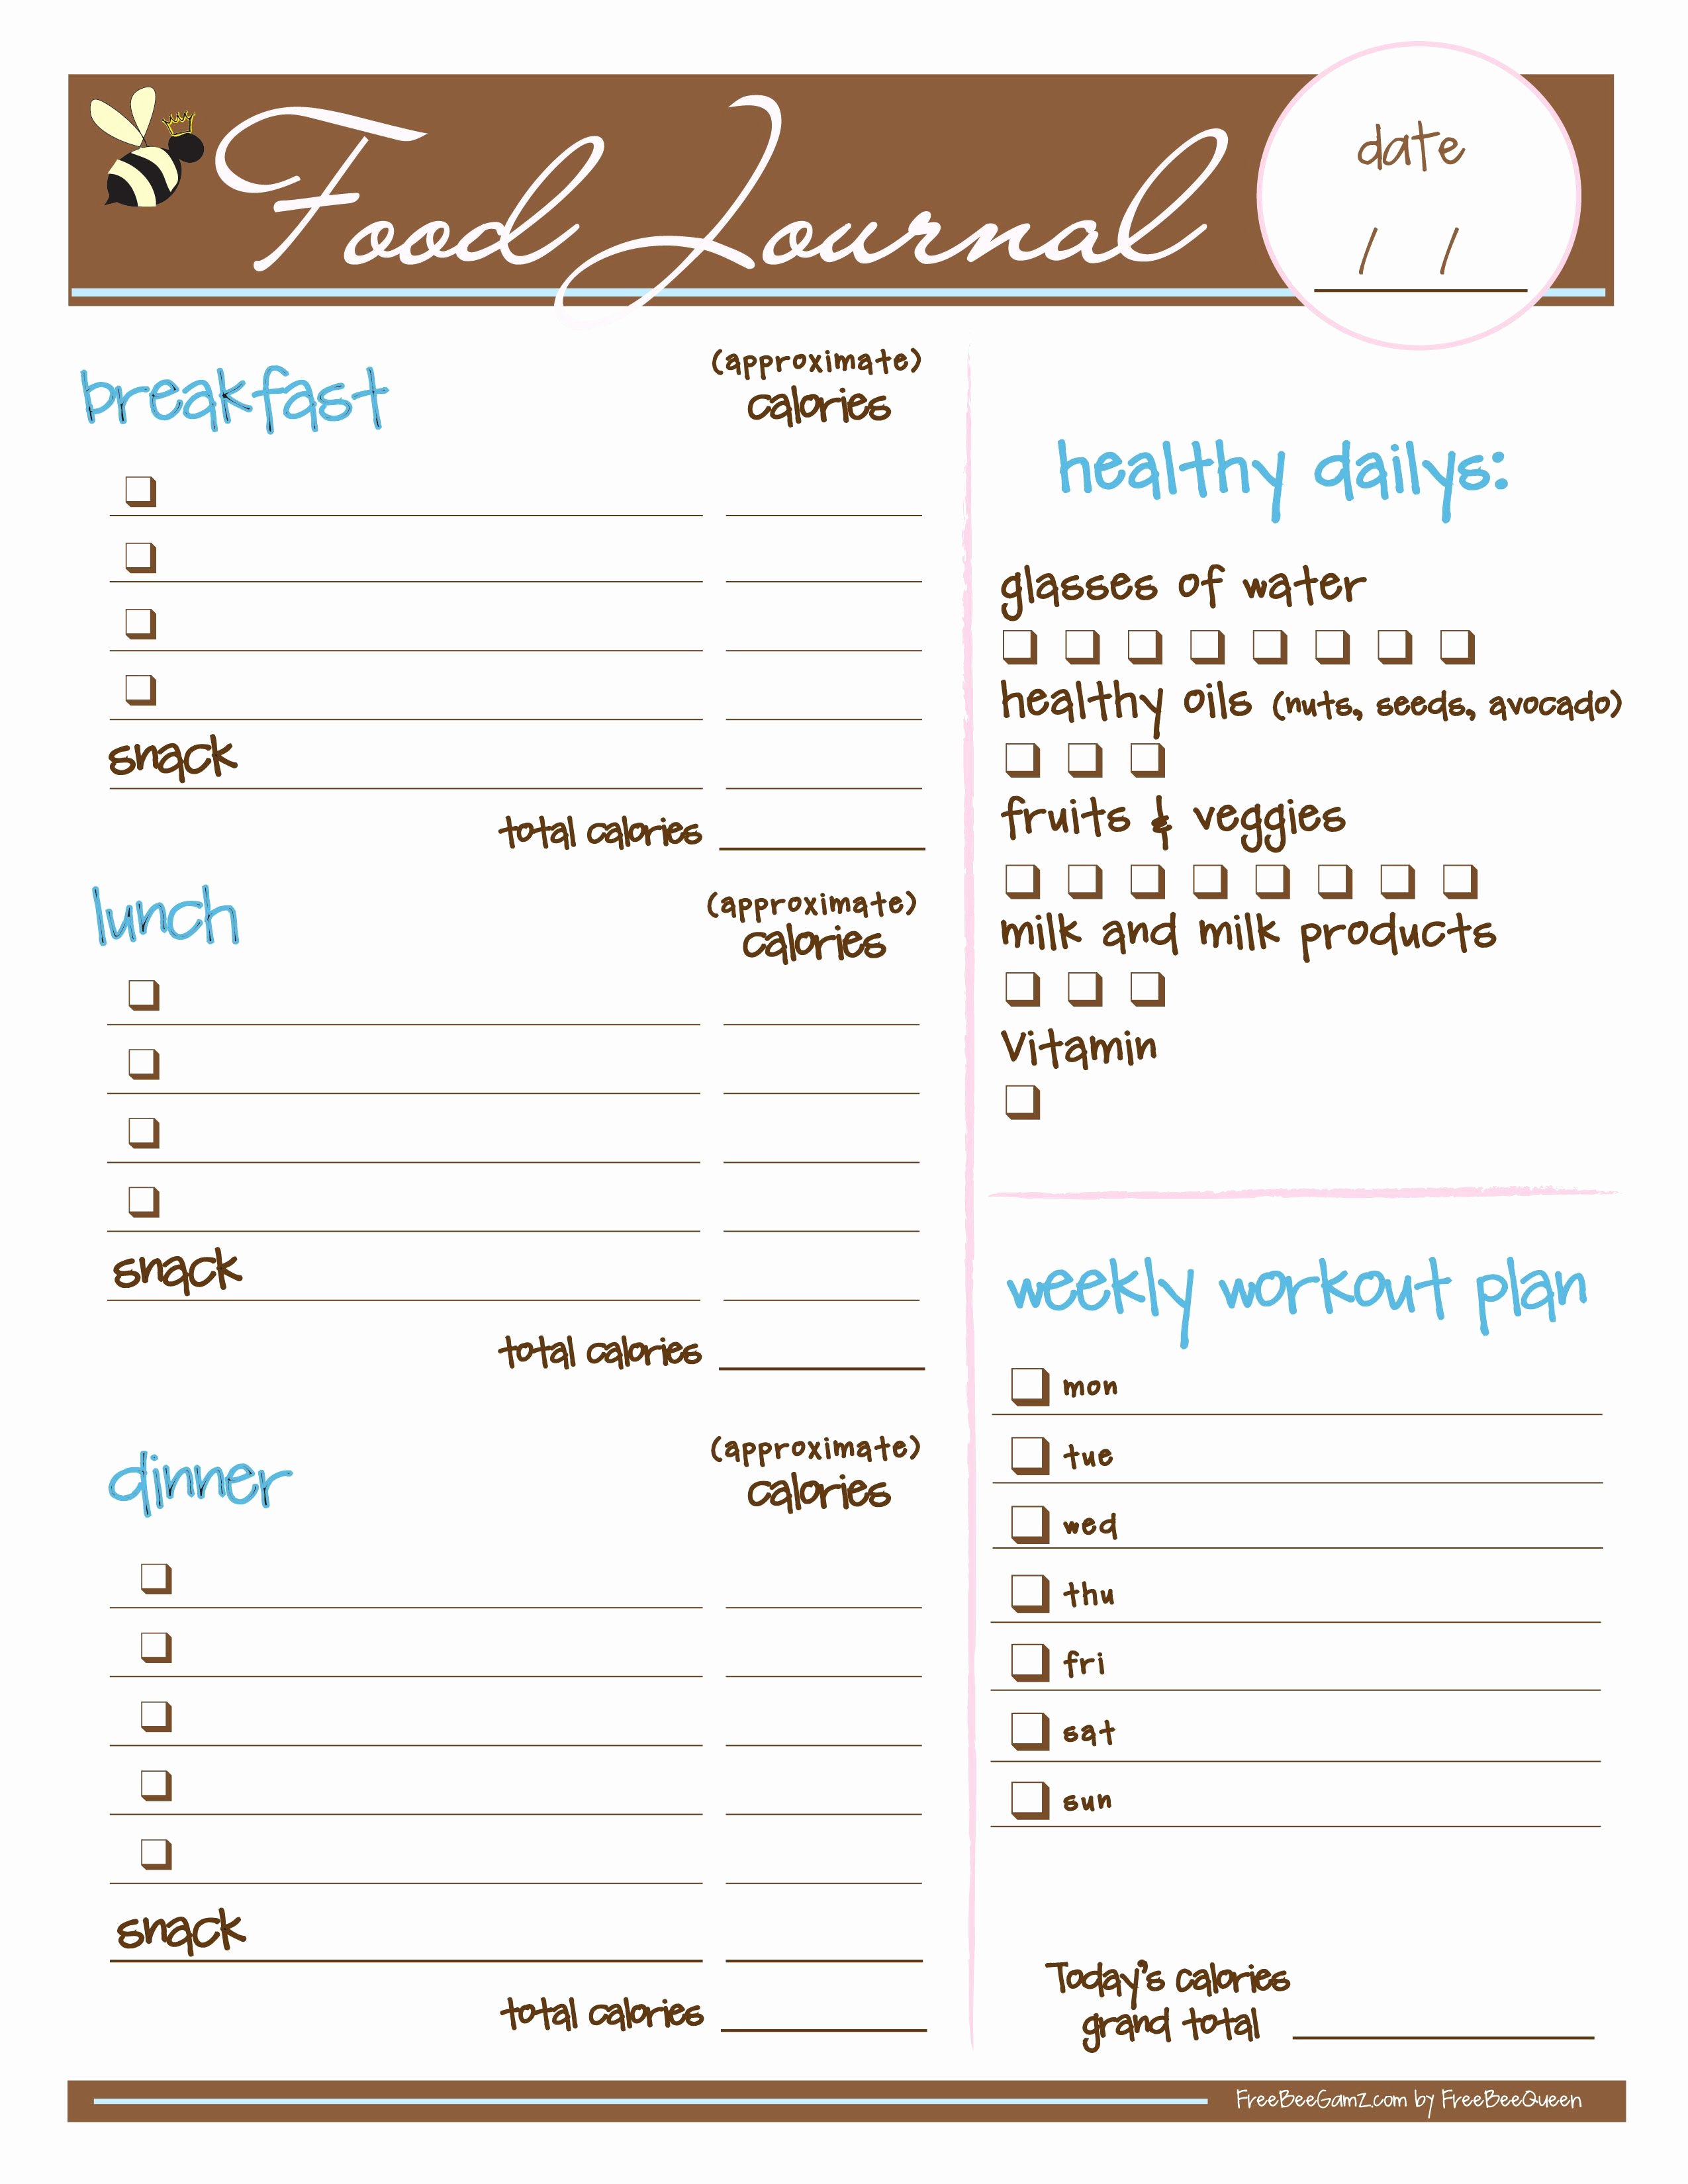 Daily Food Journal Printable Best Of Free Food Journal I Love This I Just Printed It and It